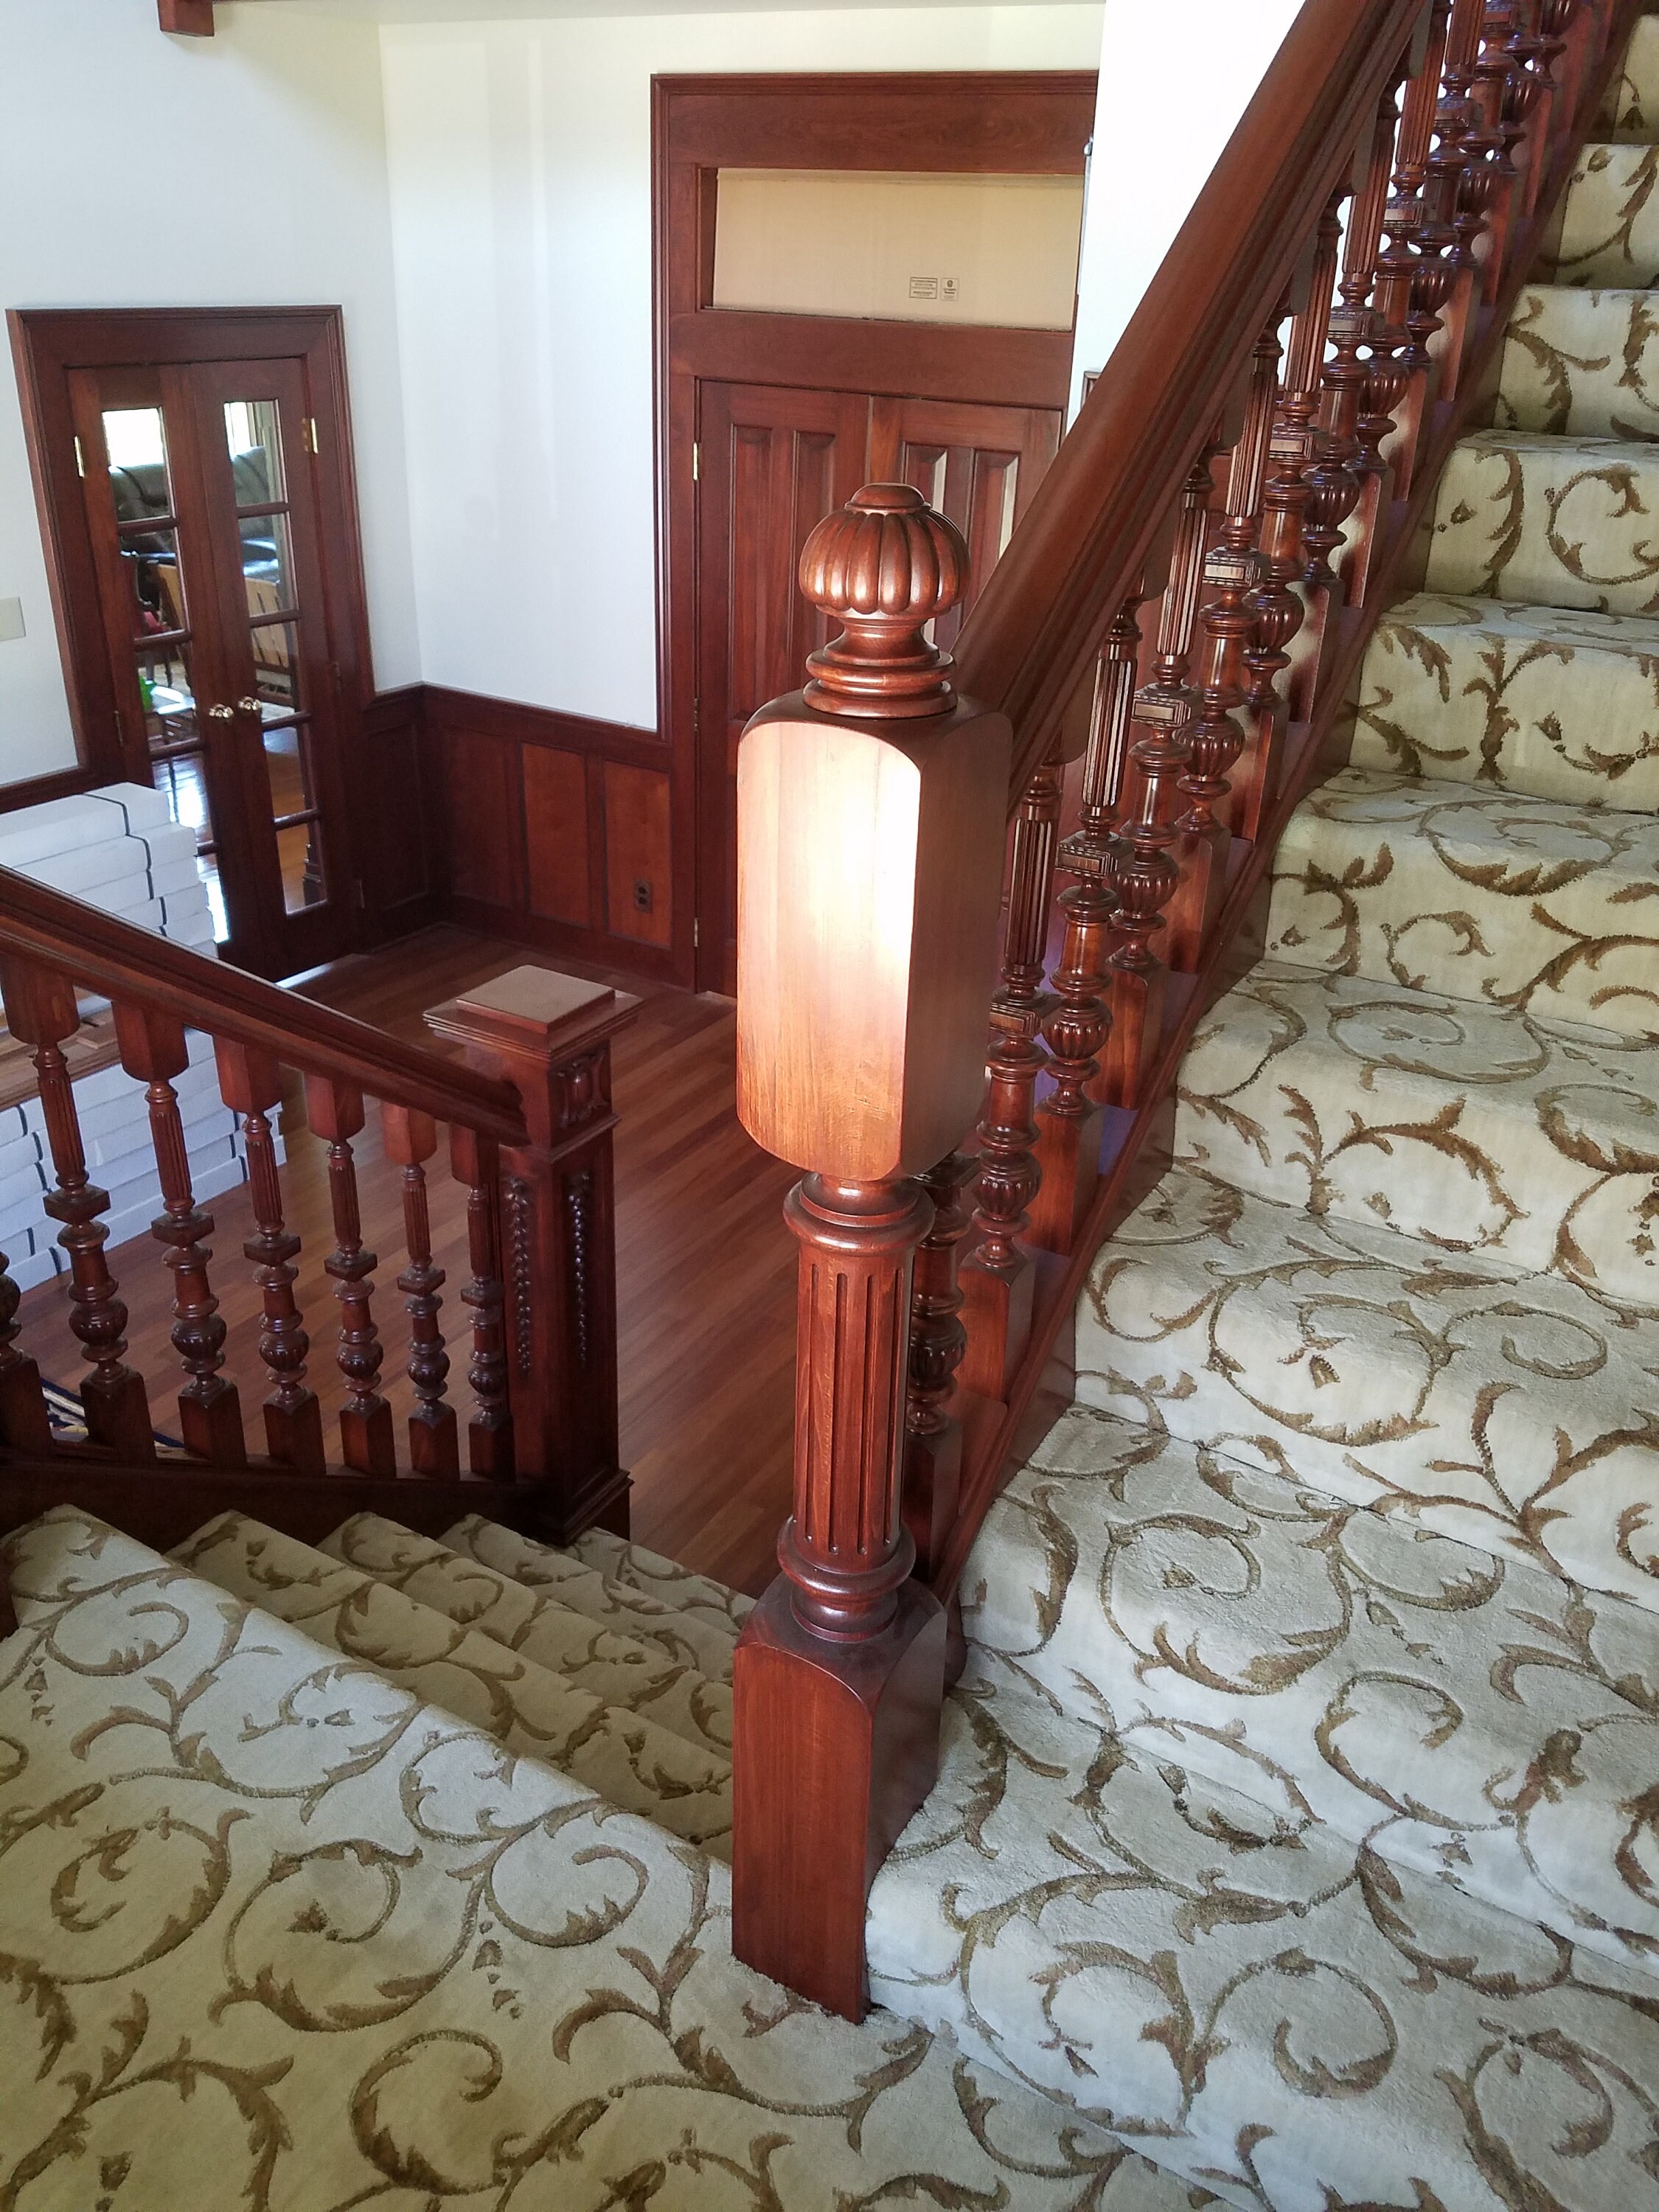 Unfinished Decorative Carved Staircases Newel Post Cap, Solid Wood Cornices  Finial, 3D Carved Wood Ornamentation, MD094 